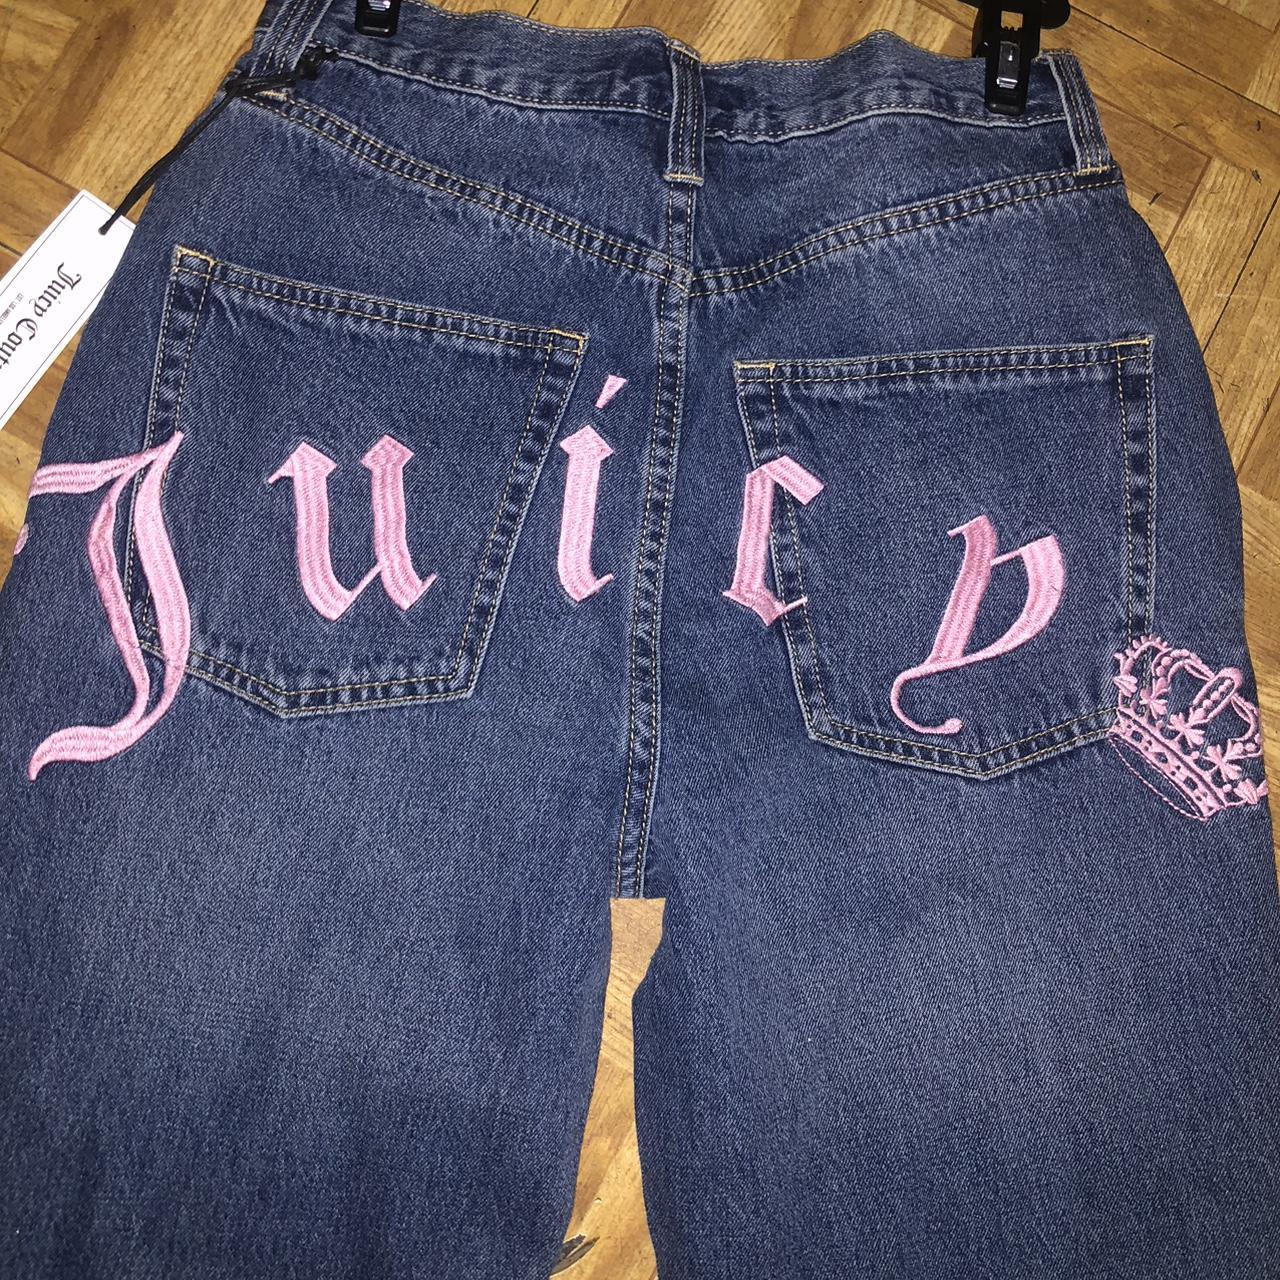 Juicy Couture Jeans Size 25 #juicycouture - Depop